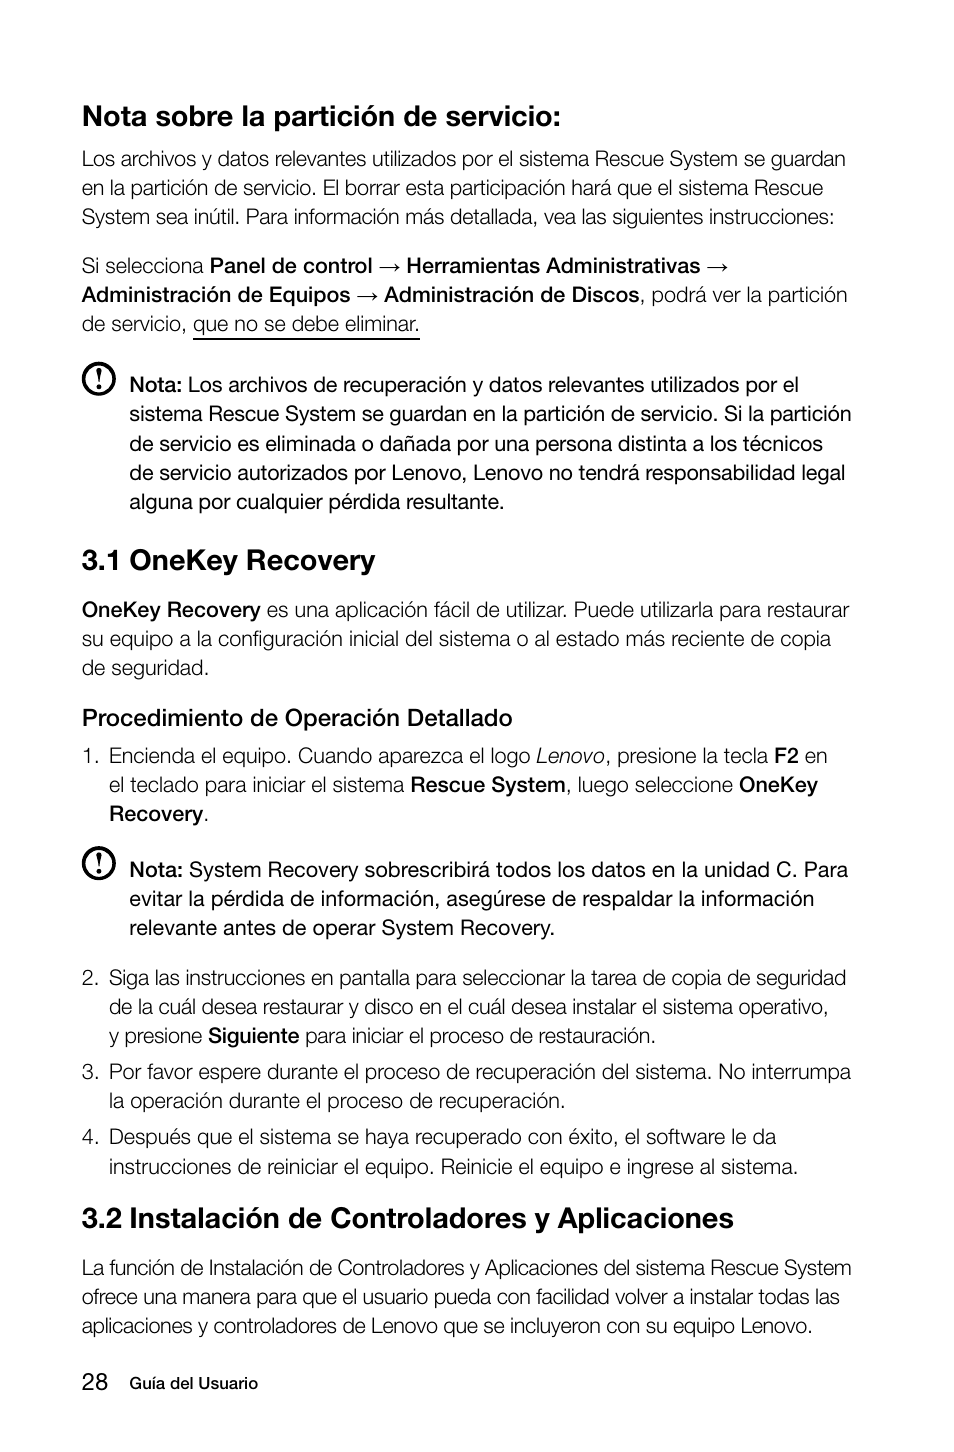 que es onekey recovery